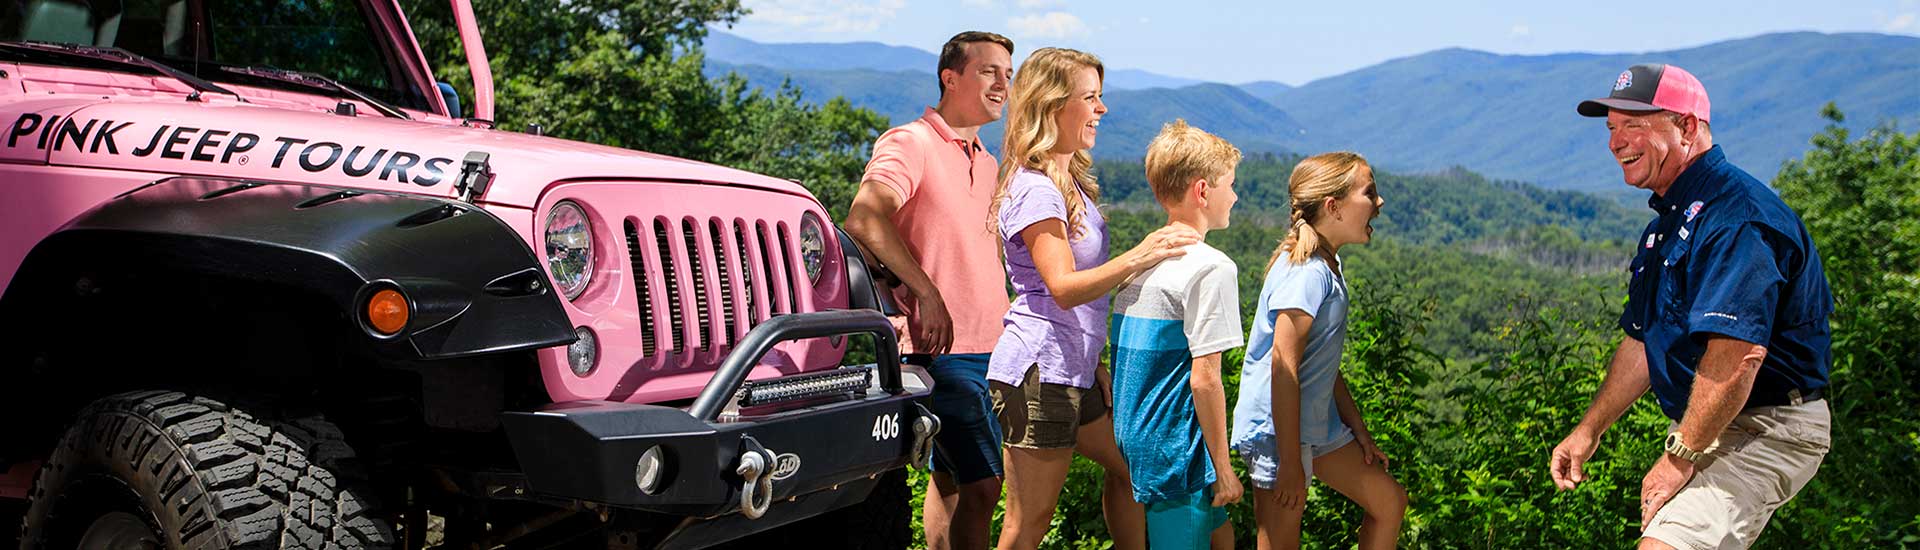 Pink Jeep tour guide laughing with guests next to jeep with clear summer view of Smoky Mountains in background.